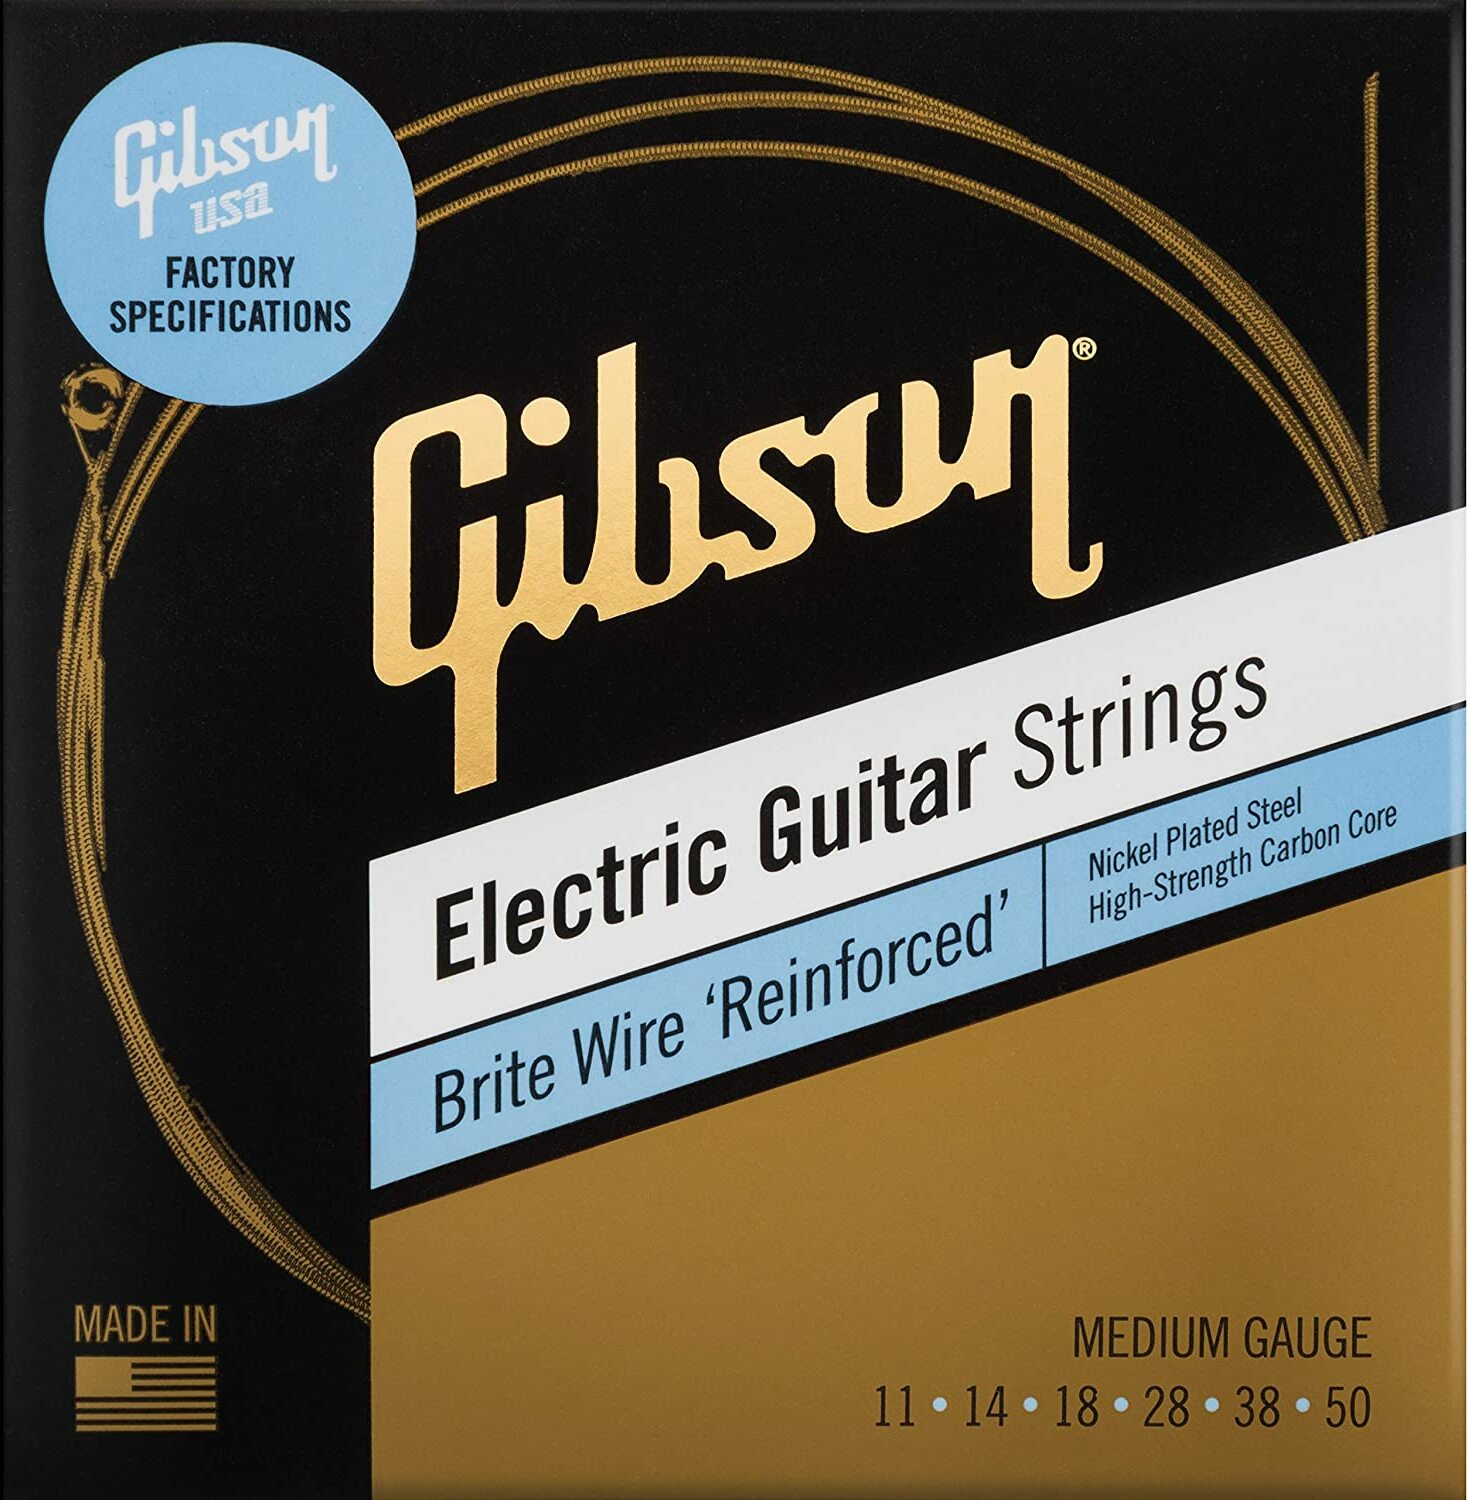 Gibson Seg-bwr10 Brite Wire Reinforced Nps Electric Guitar Light 6c 10-46 - Electric guitar strings - Main picture